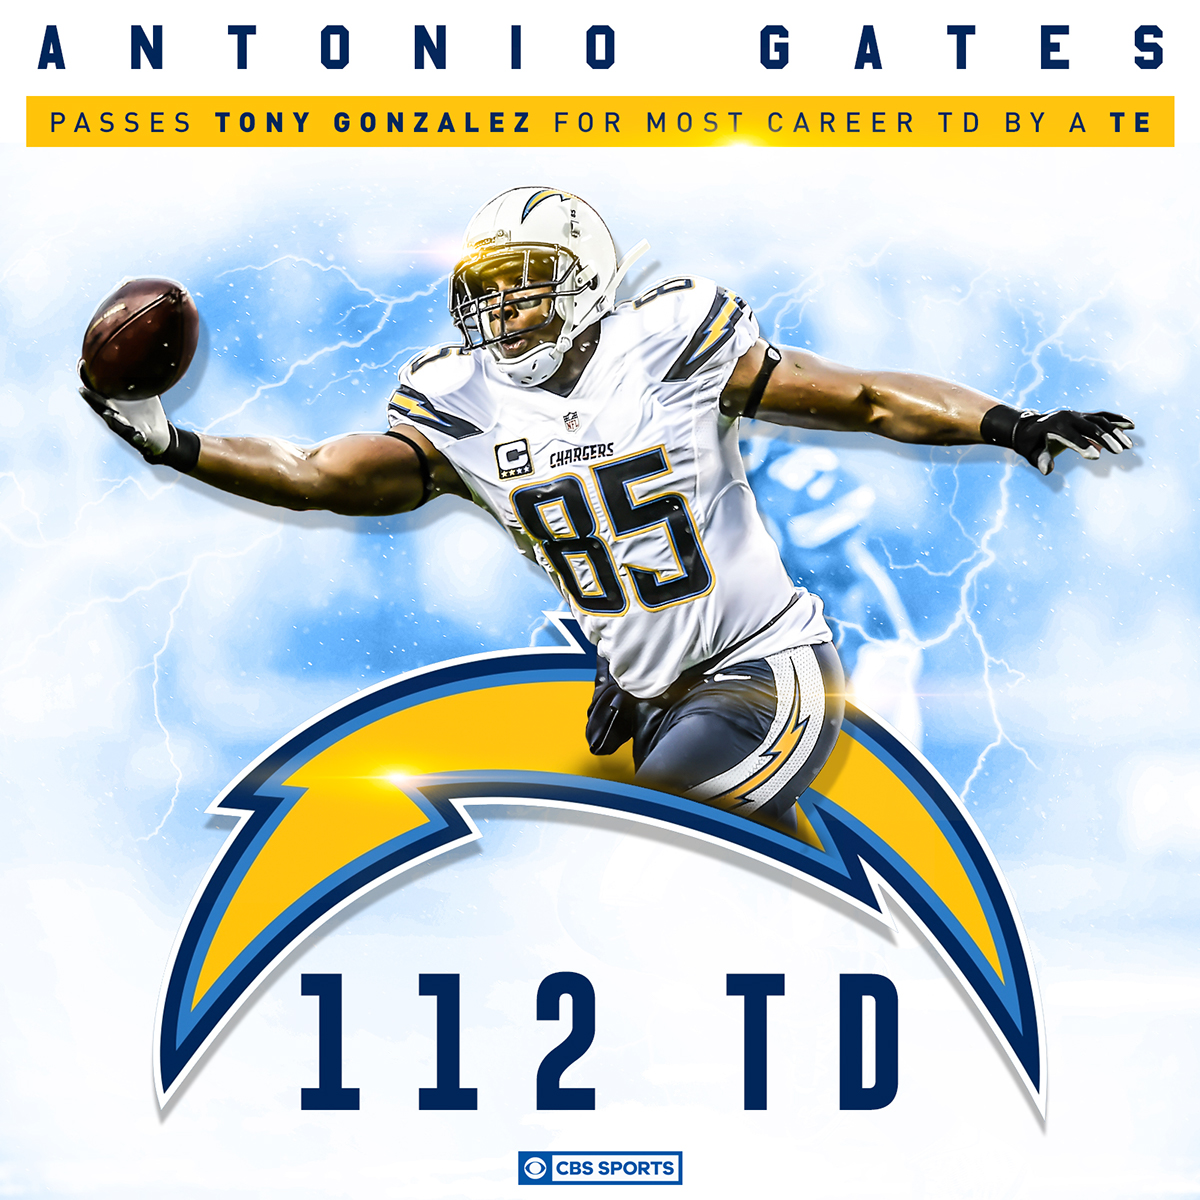 nfl Los Angeles Chargers san diego chargers football chargers Tight End te record Los Angeles